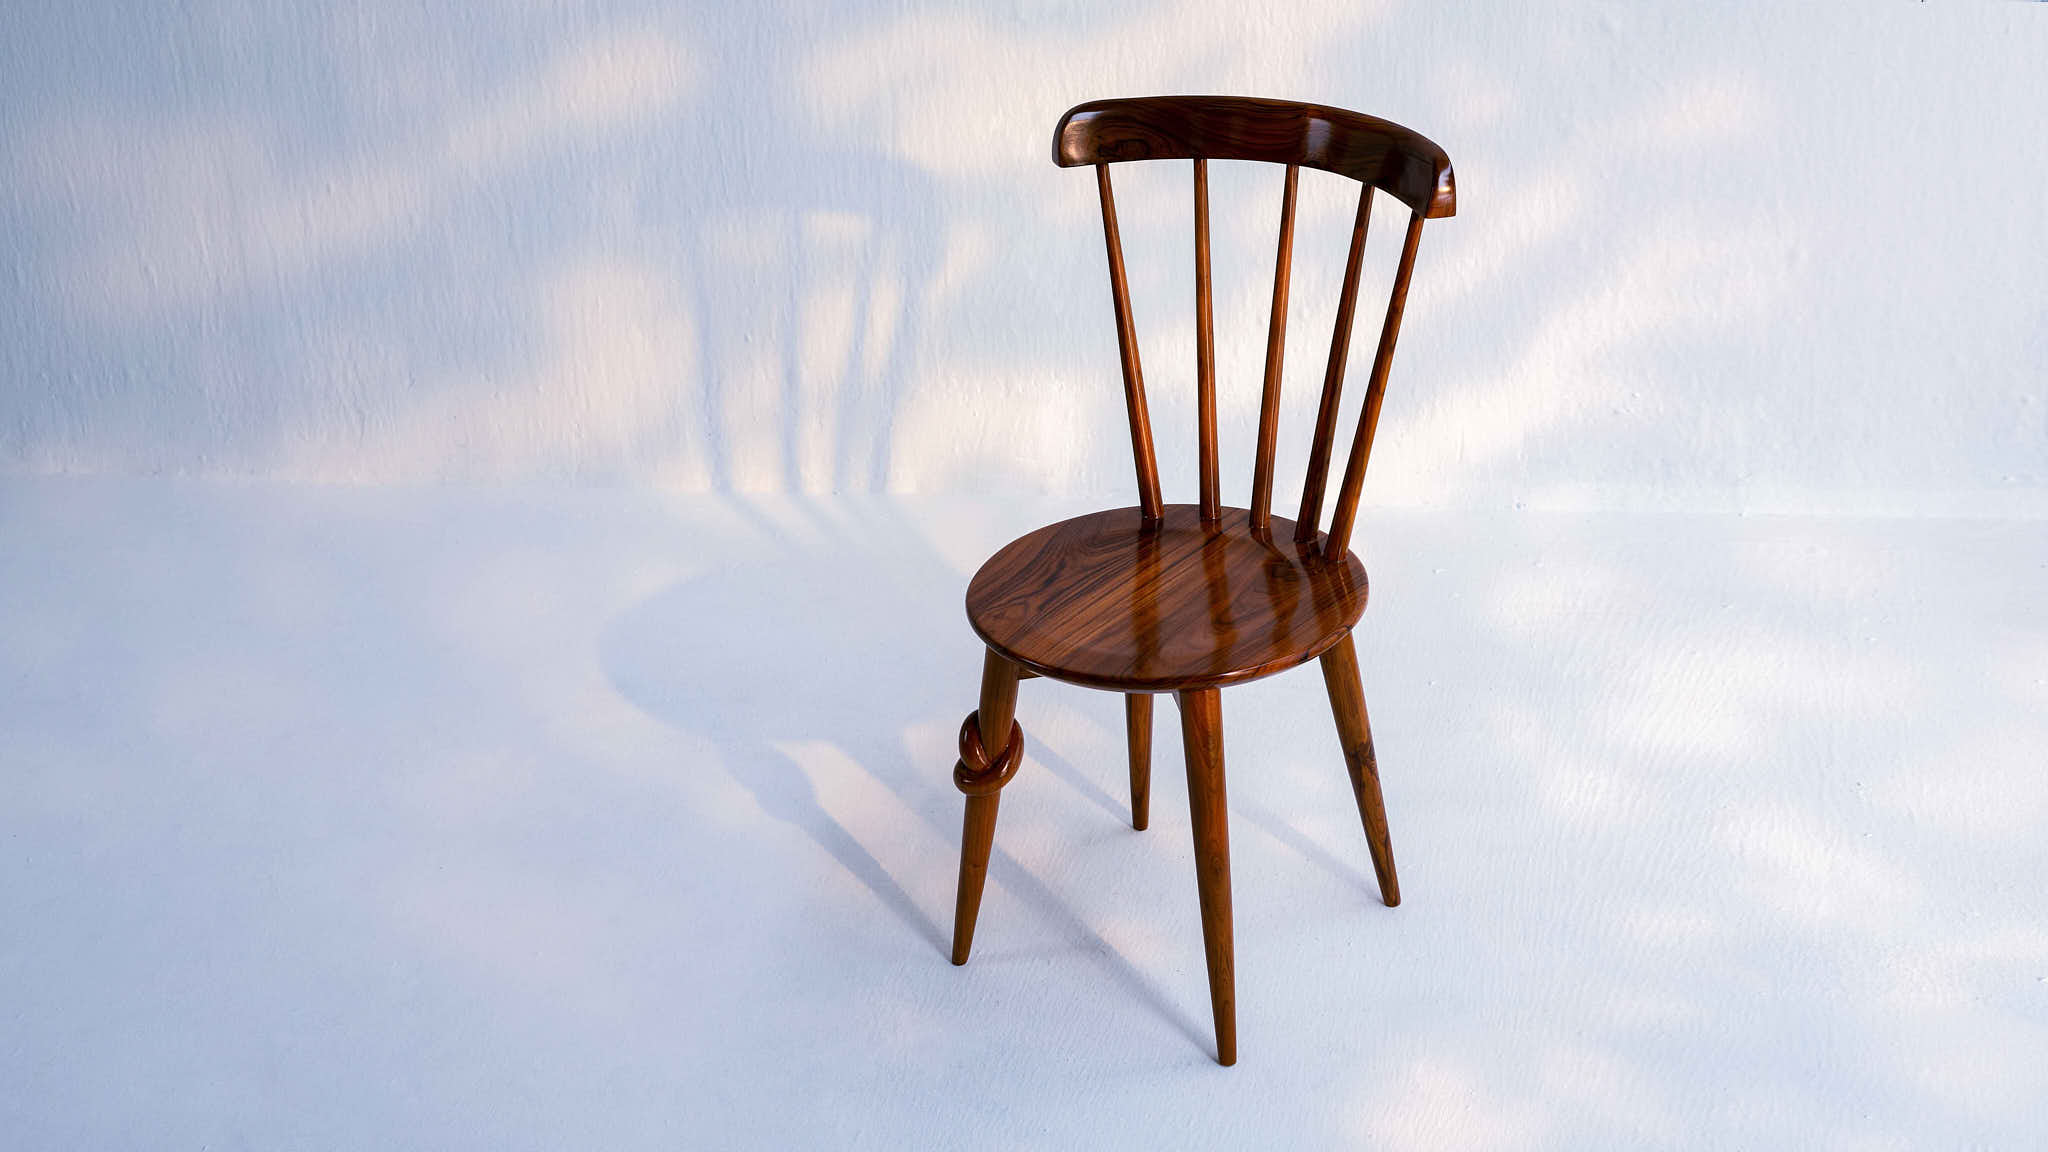 The Knotty Windsor Chair